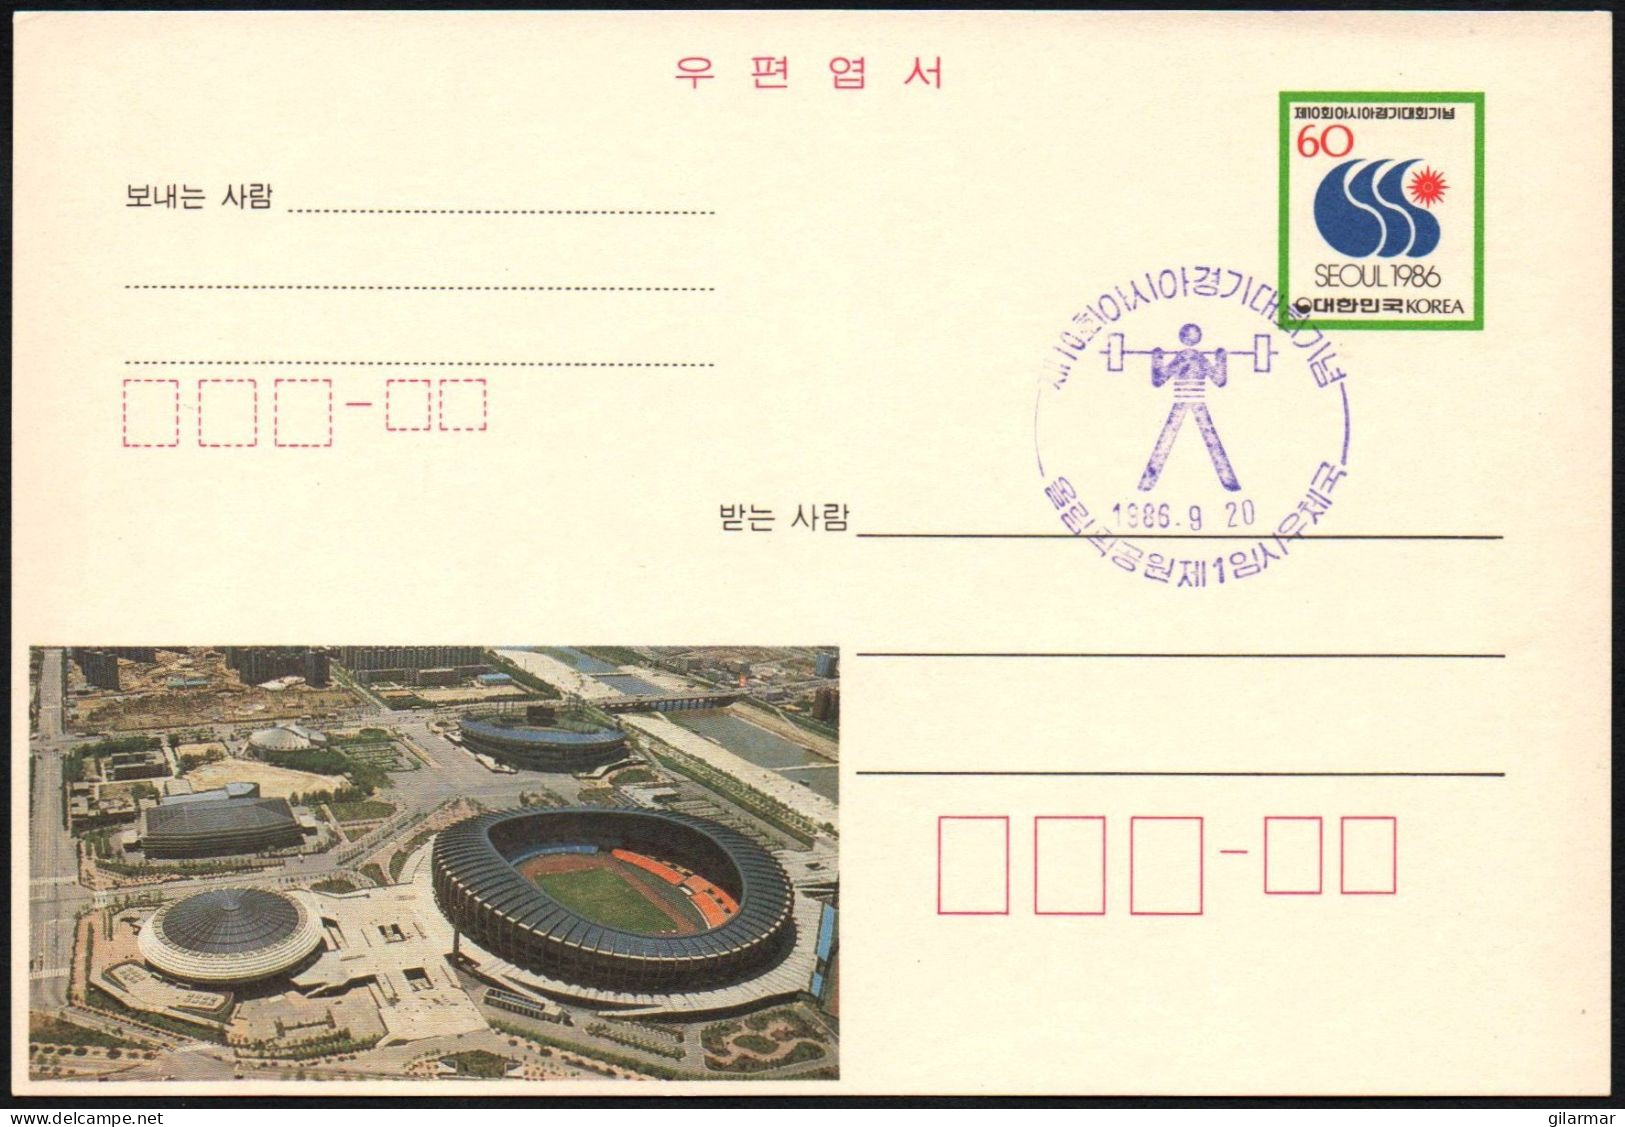 SOUTH KOREA 1986 - 10th ASIAN GAMES - WEIGHTLIFTING - PURPLE CANCELLATION - STATIONARY: OLYMPIC COMPLEX - G - Pesistica